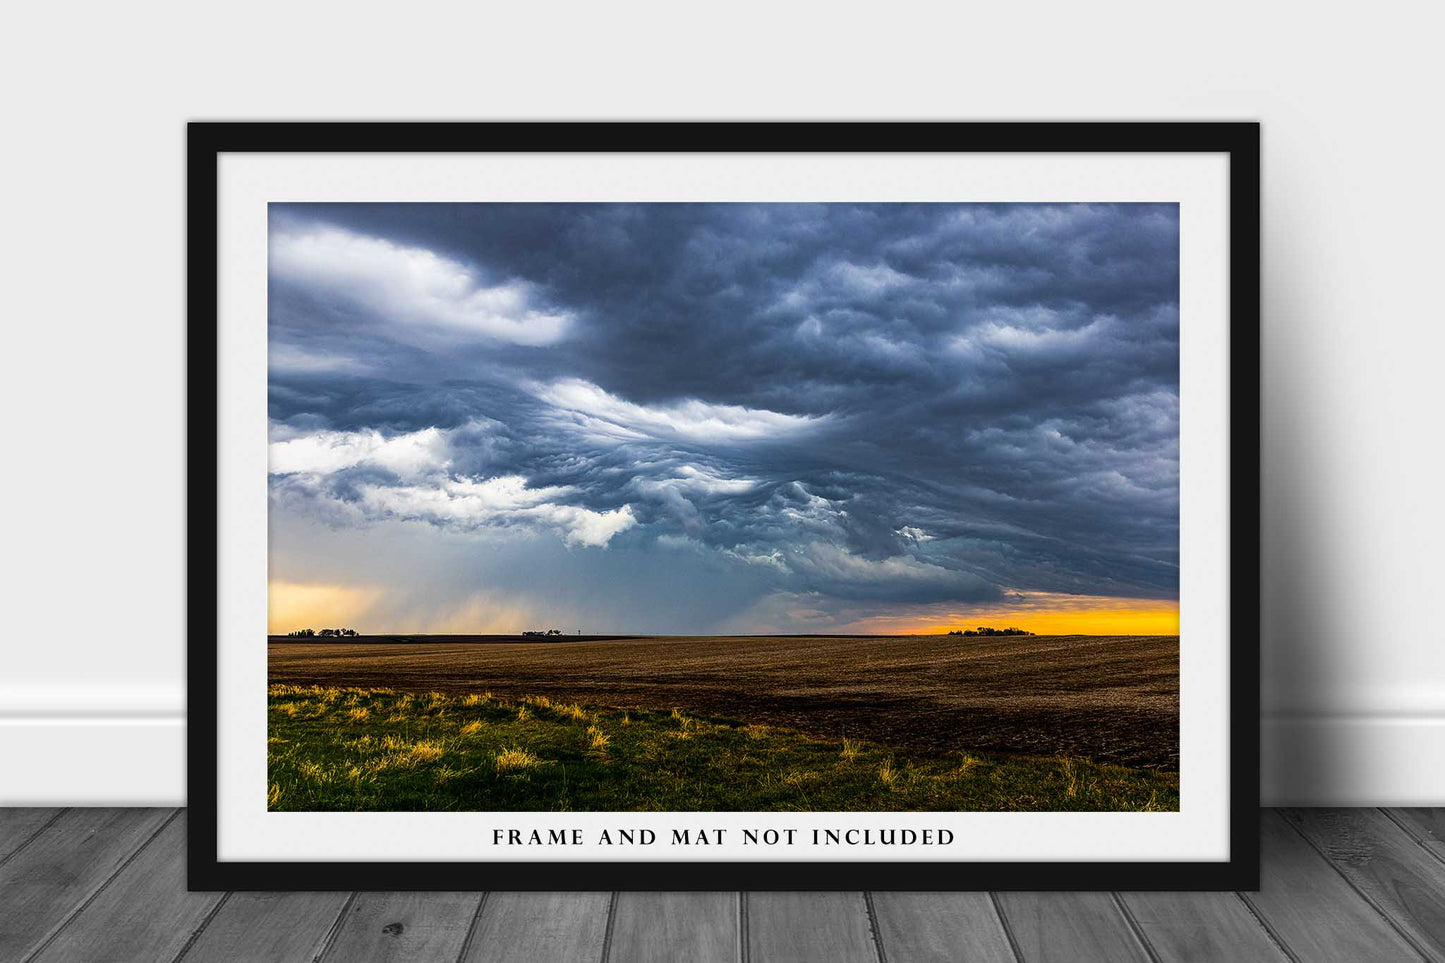 Thunderstorm Photography Print - Picture of Dramatic Storm Clouds Over Farmland on Stormy Day in Iowa Weather Wall Art Midwestern Decor